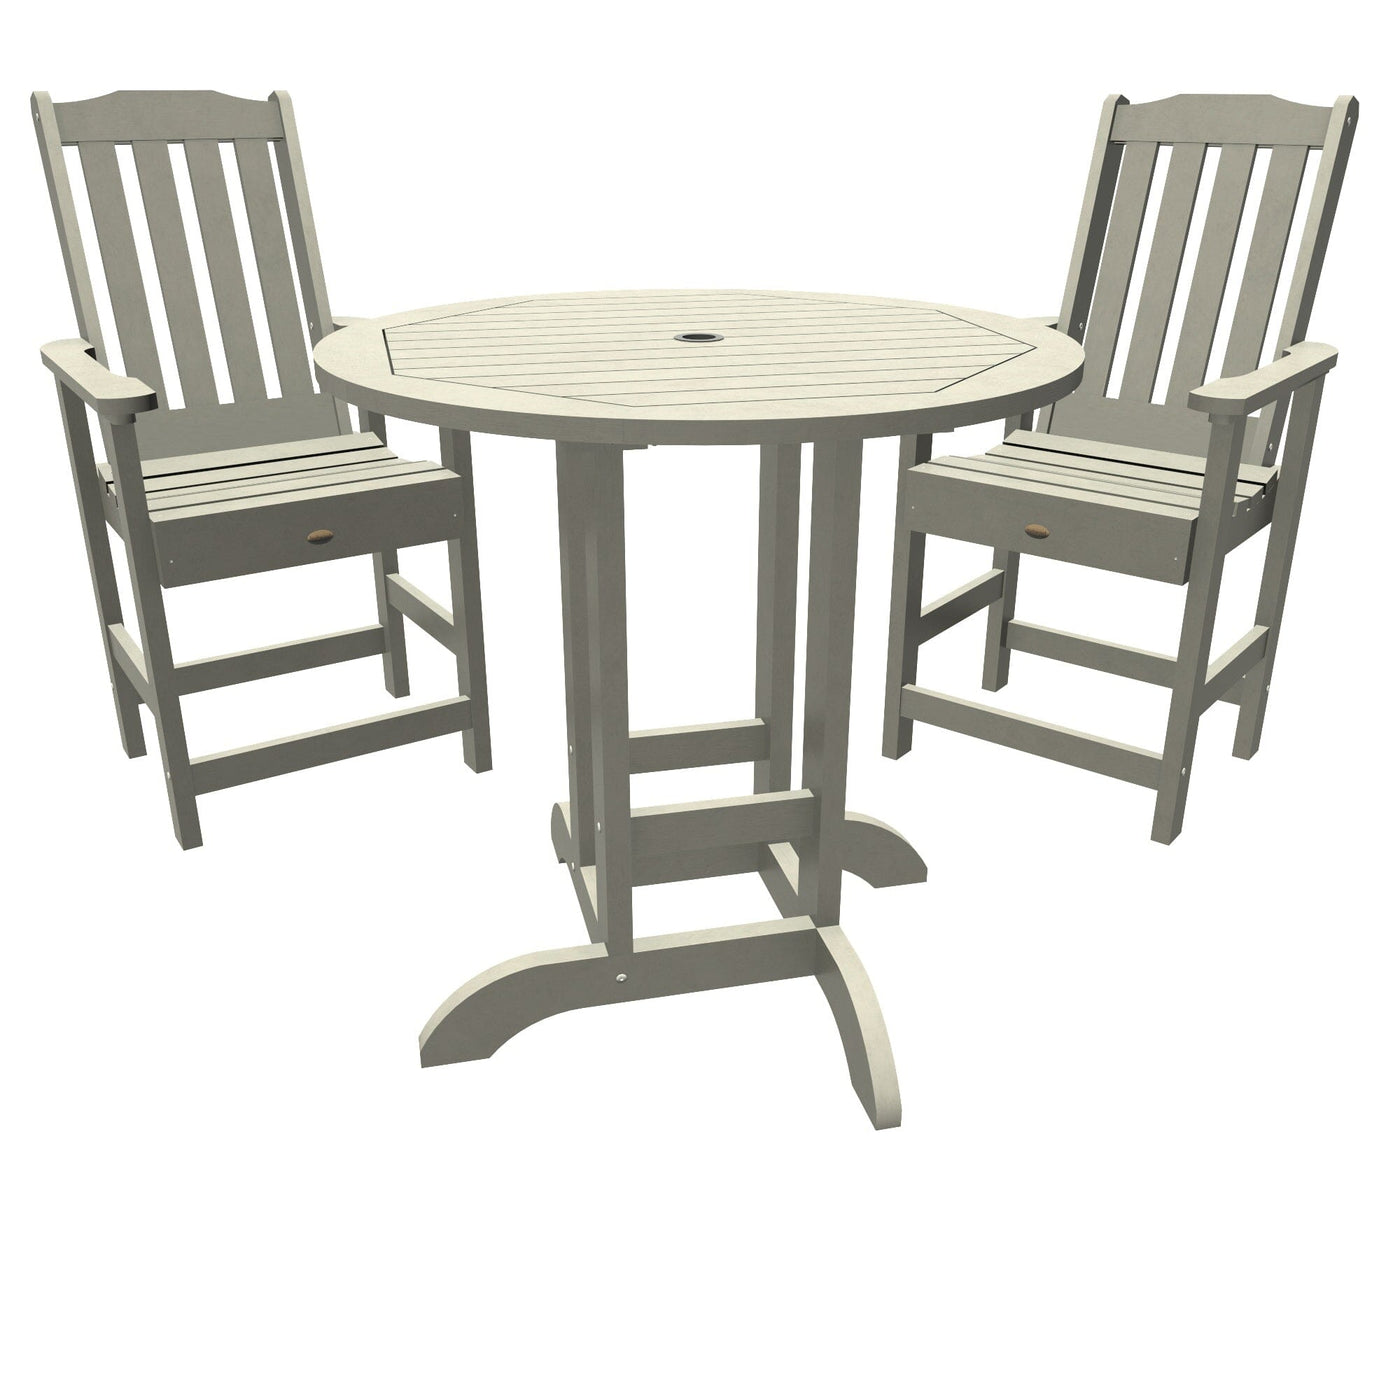 Lehigh 3pc 36in Round Dining Set - Counter Height Dining Highwood USA Harbor Gray 